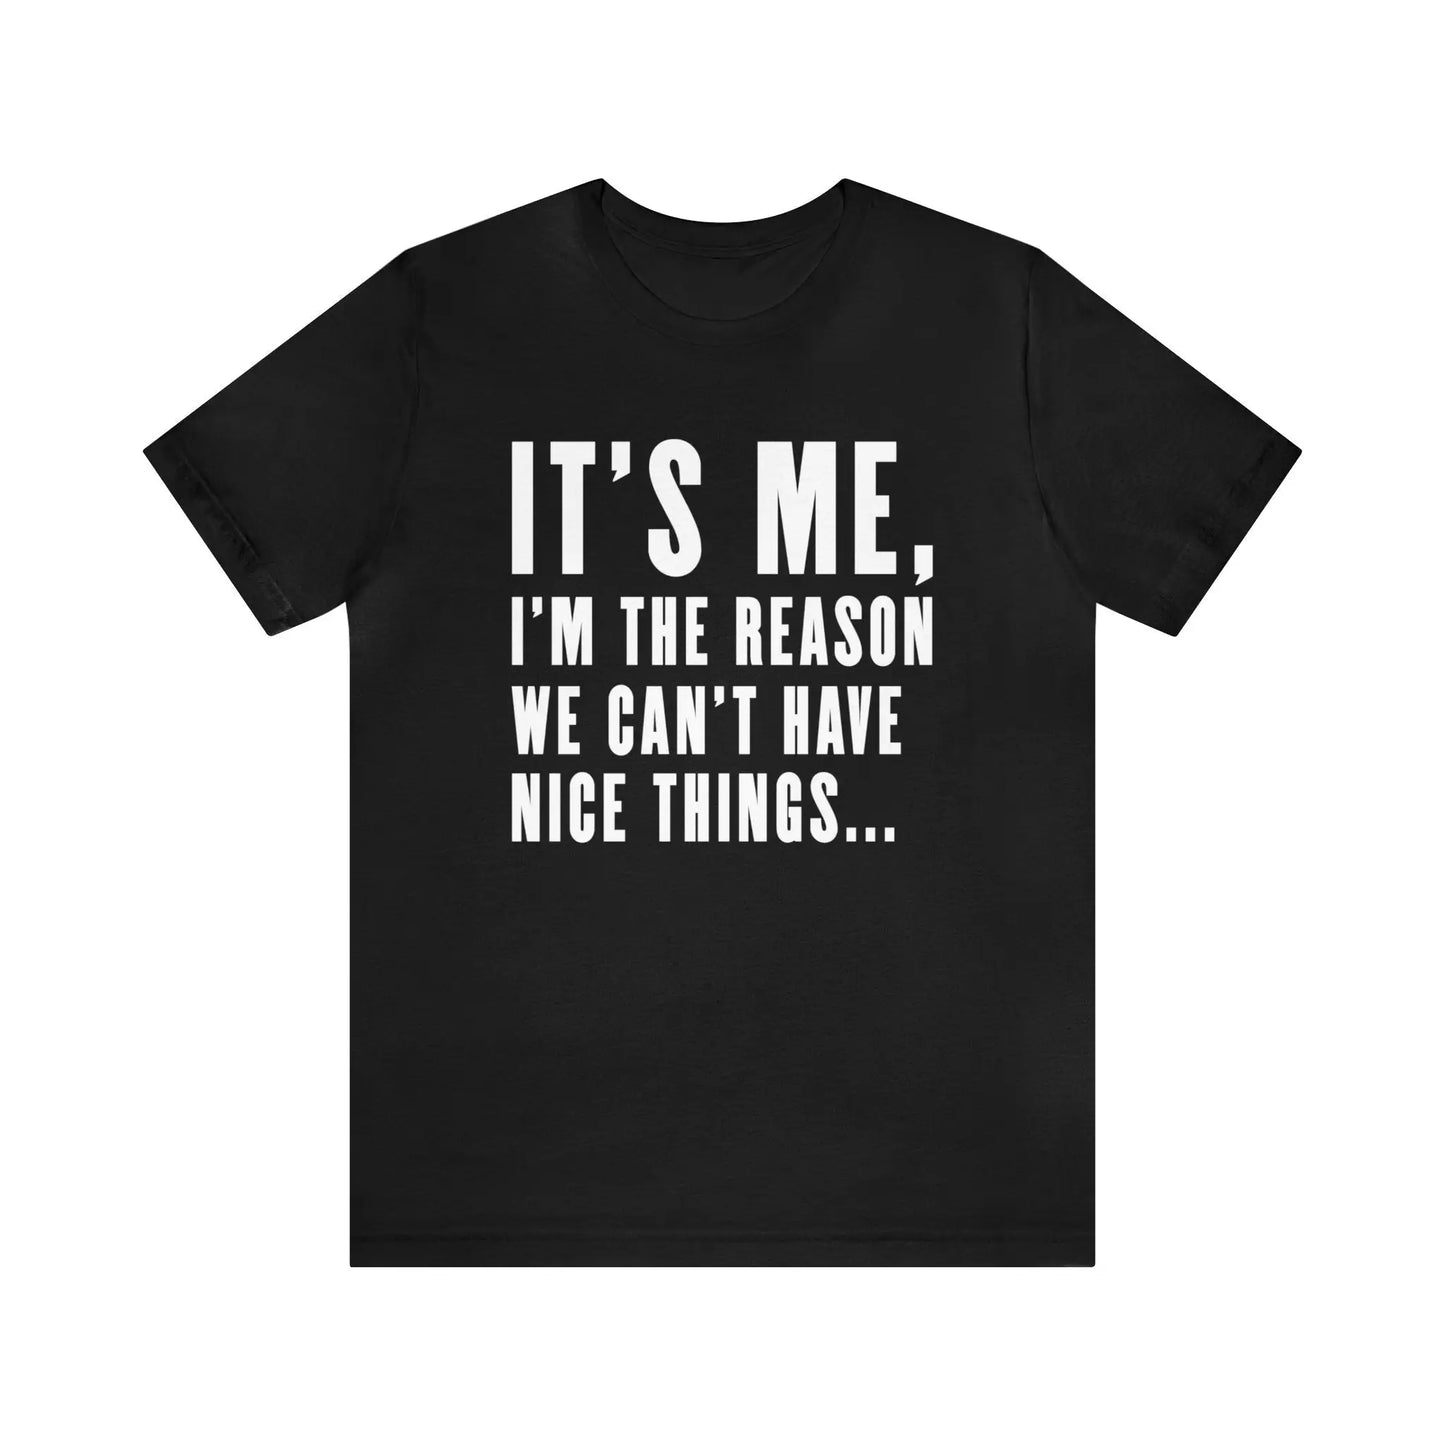 Can't Have Nice Things Men's Jersey Short Sleeve Tee - Wicked Tees